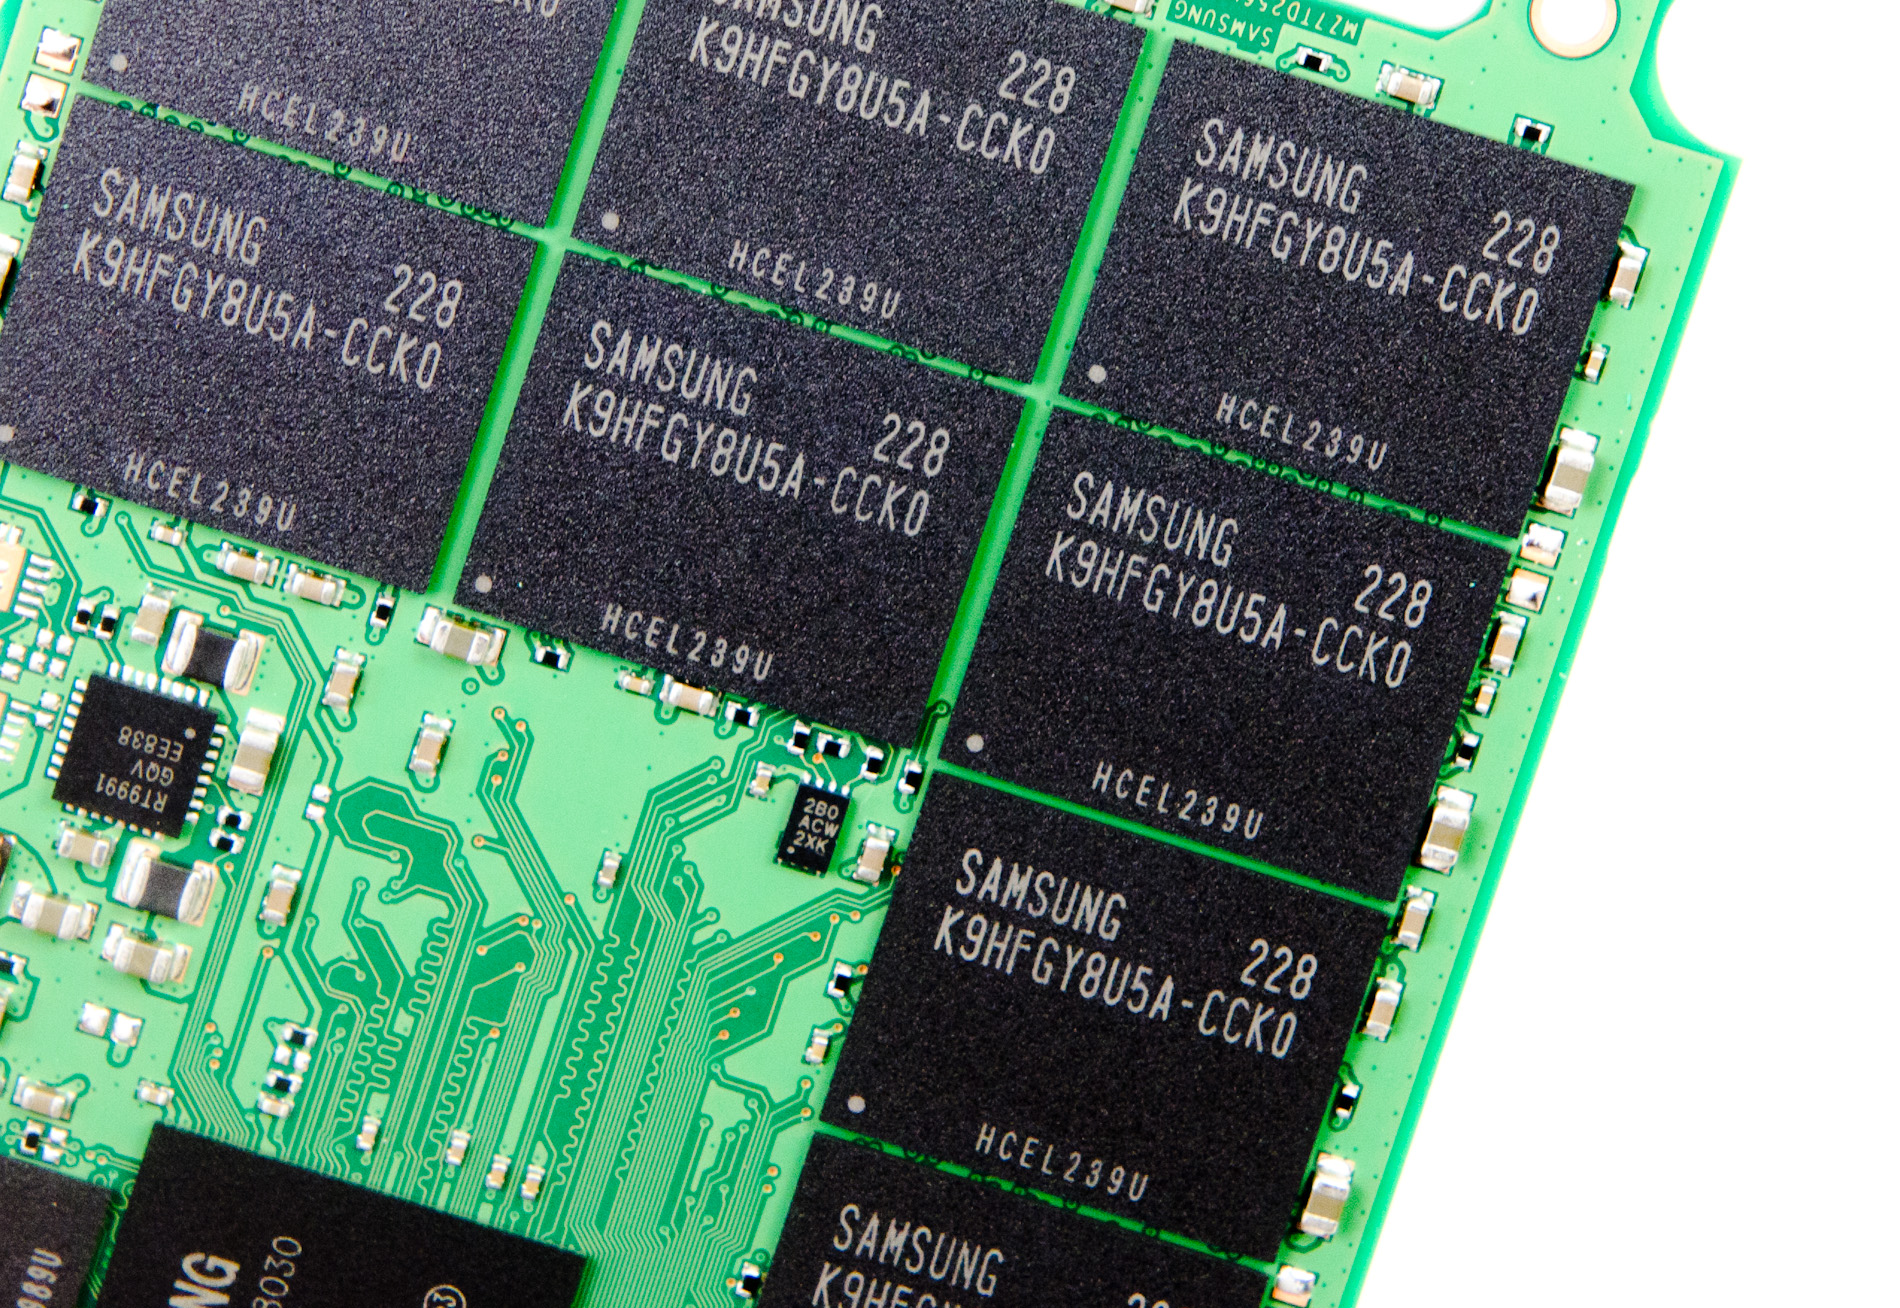 SSD 840 Pro Review